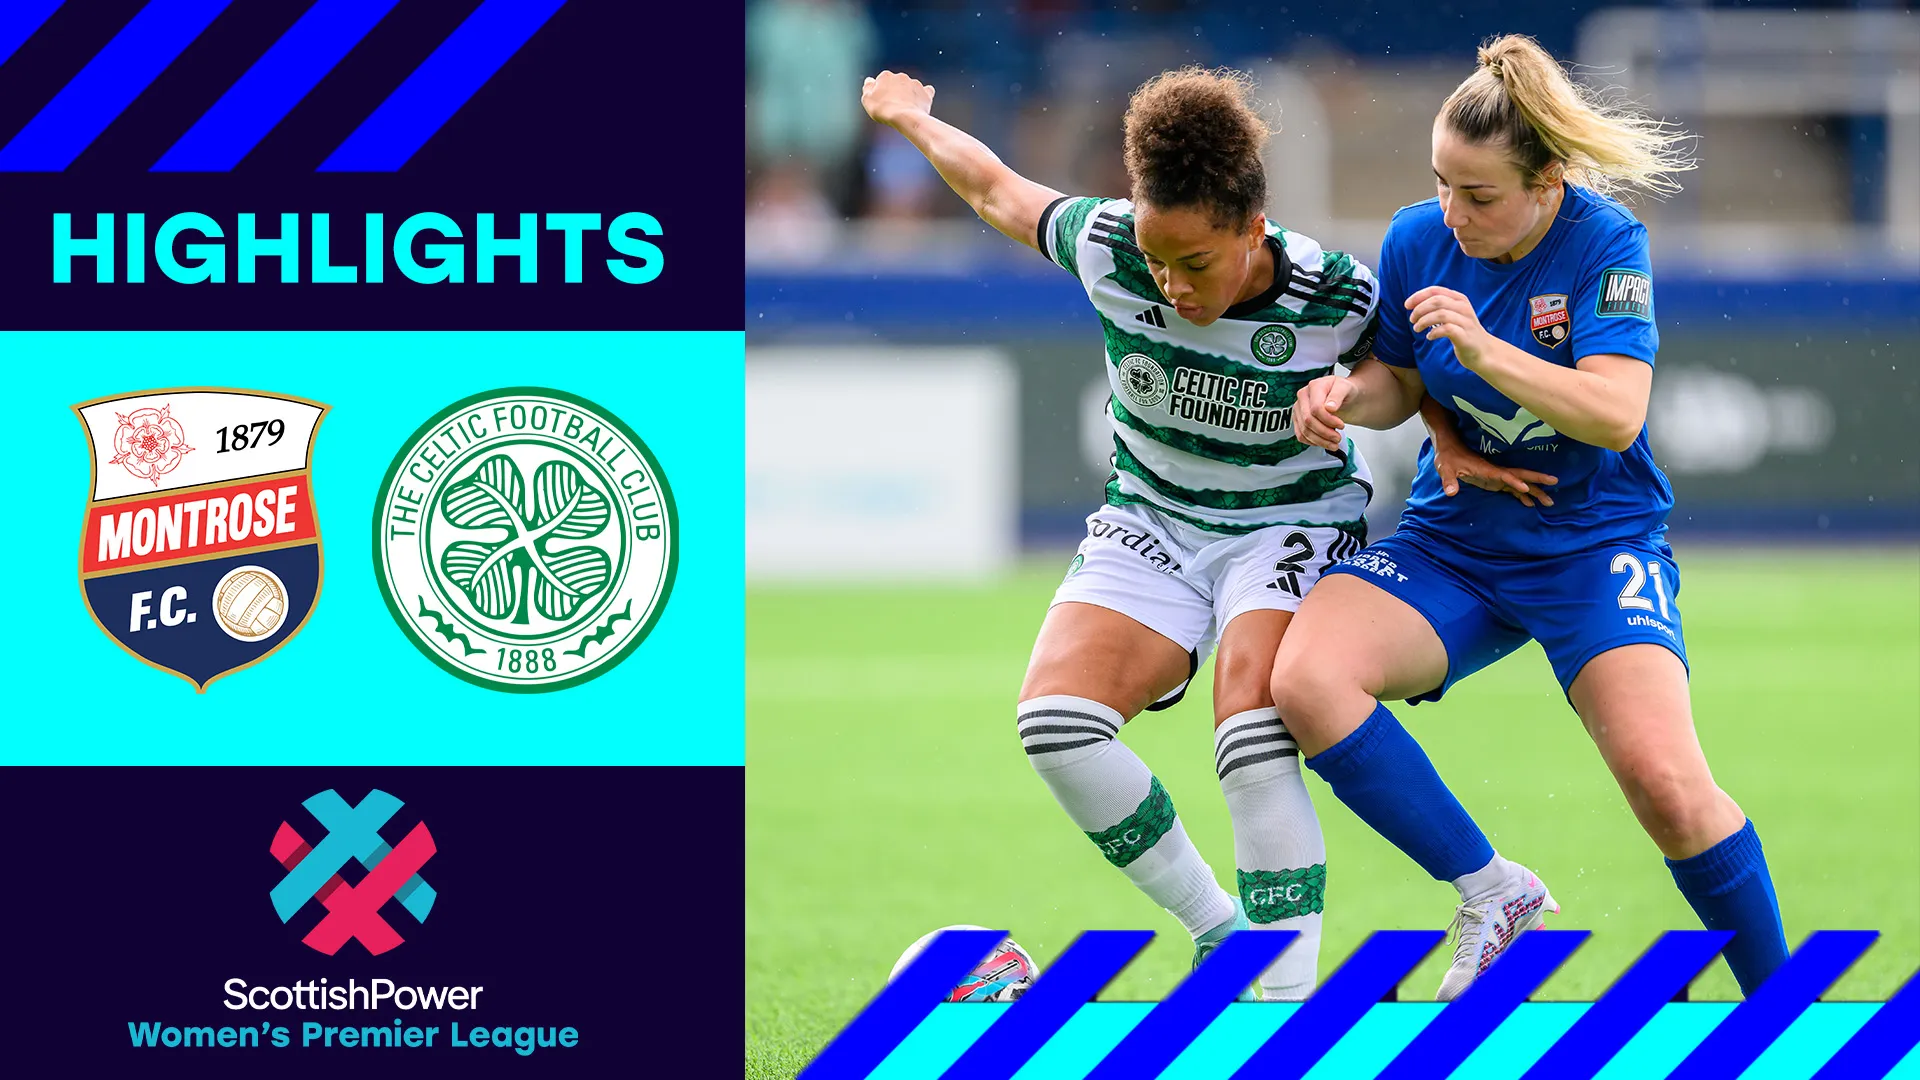 Image for Montrose 0-9 Celtic | Celtic welcome Montrose to top-flight with big win | SWPL